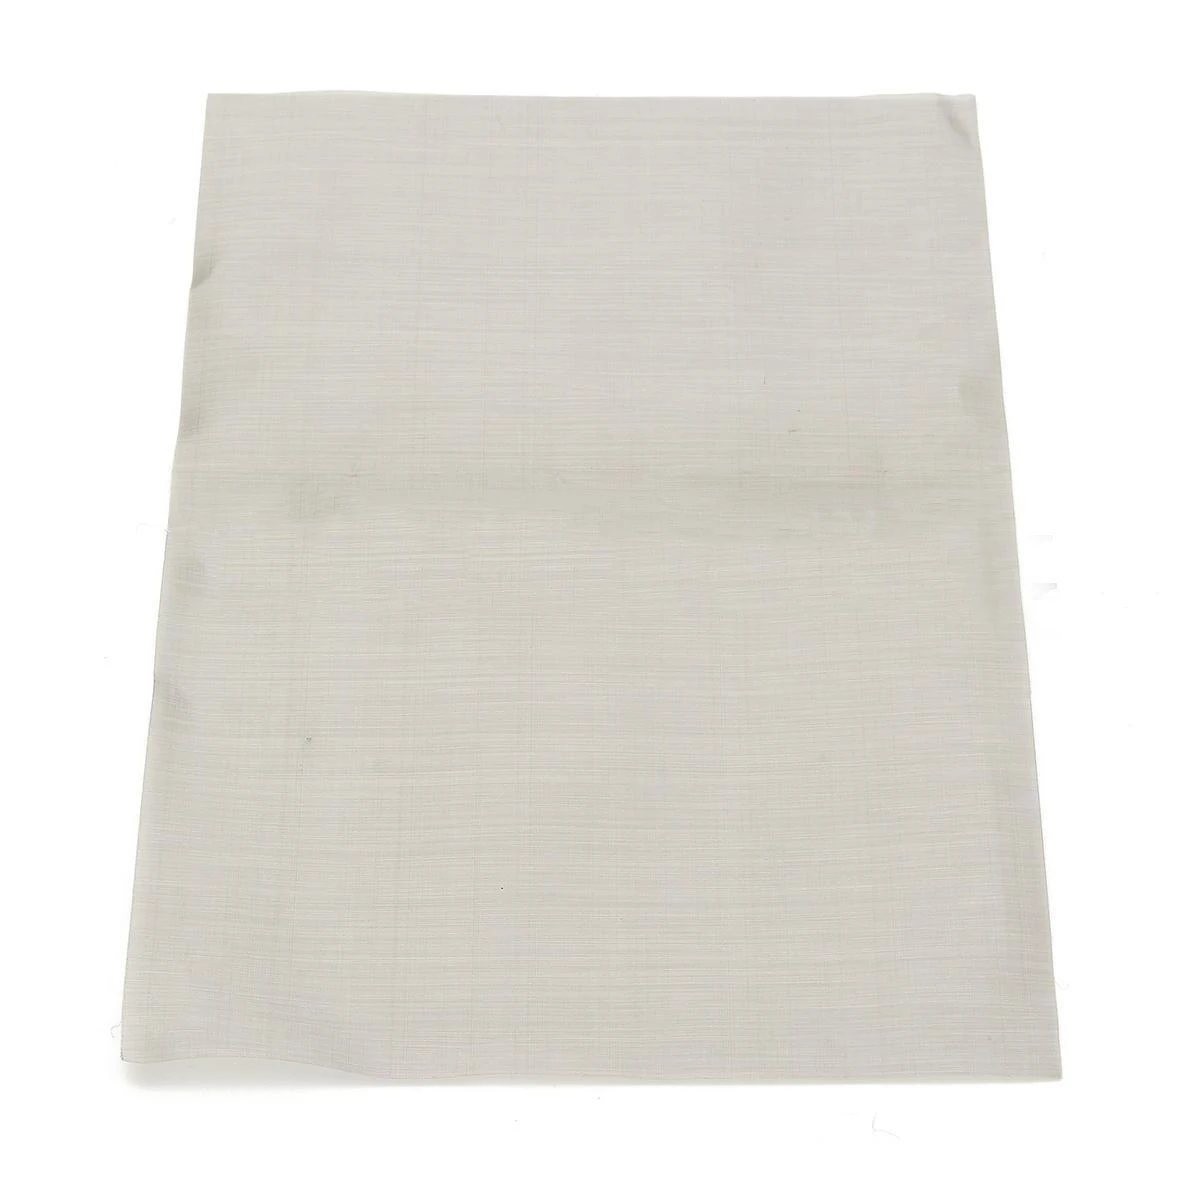 1pc Stainless Steel Woven Wire High Quality 180/300/325/400 Mesh Sheet Screen Filter 30cm*20cm For Mining Medicine Tools Mayitr